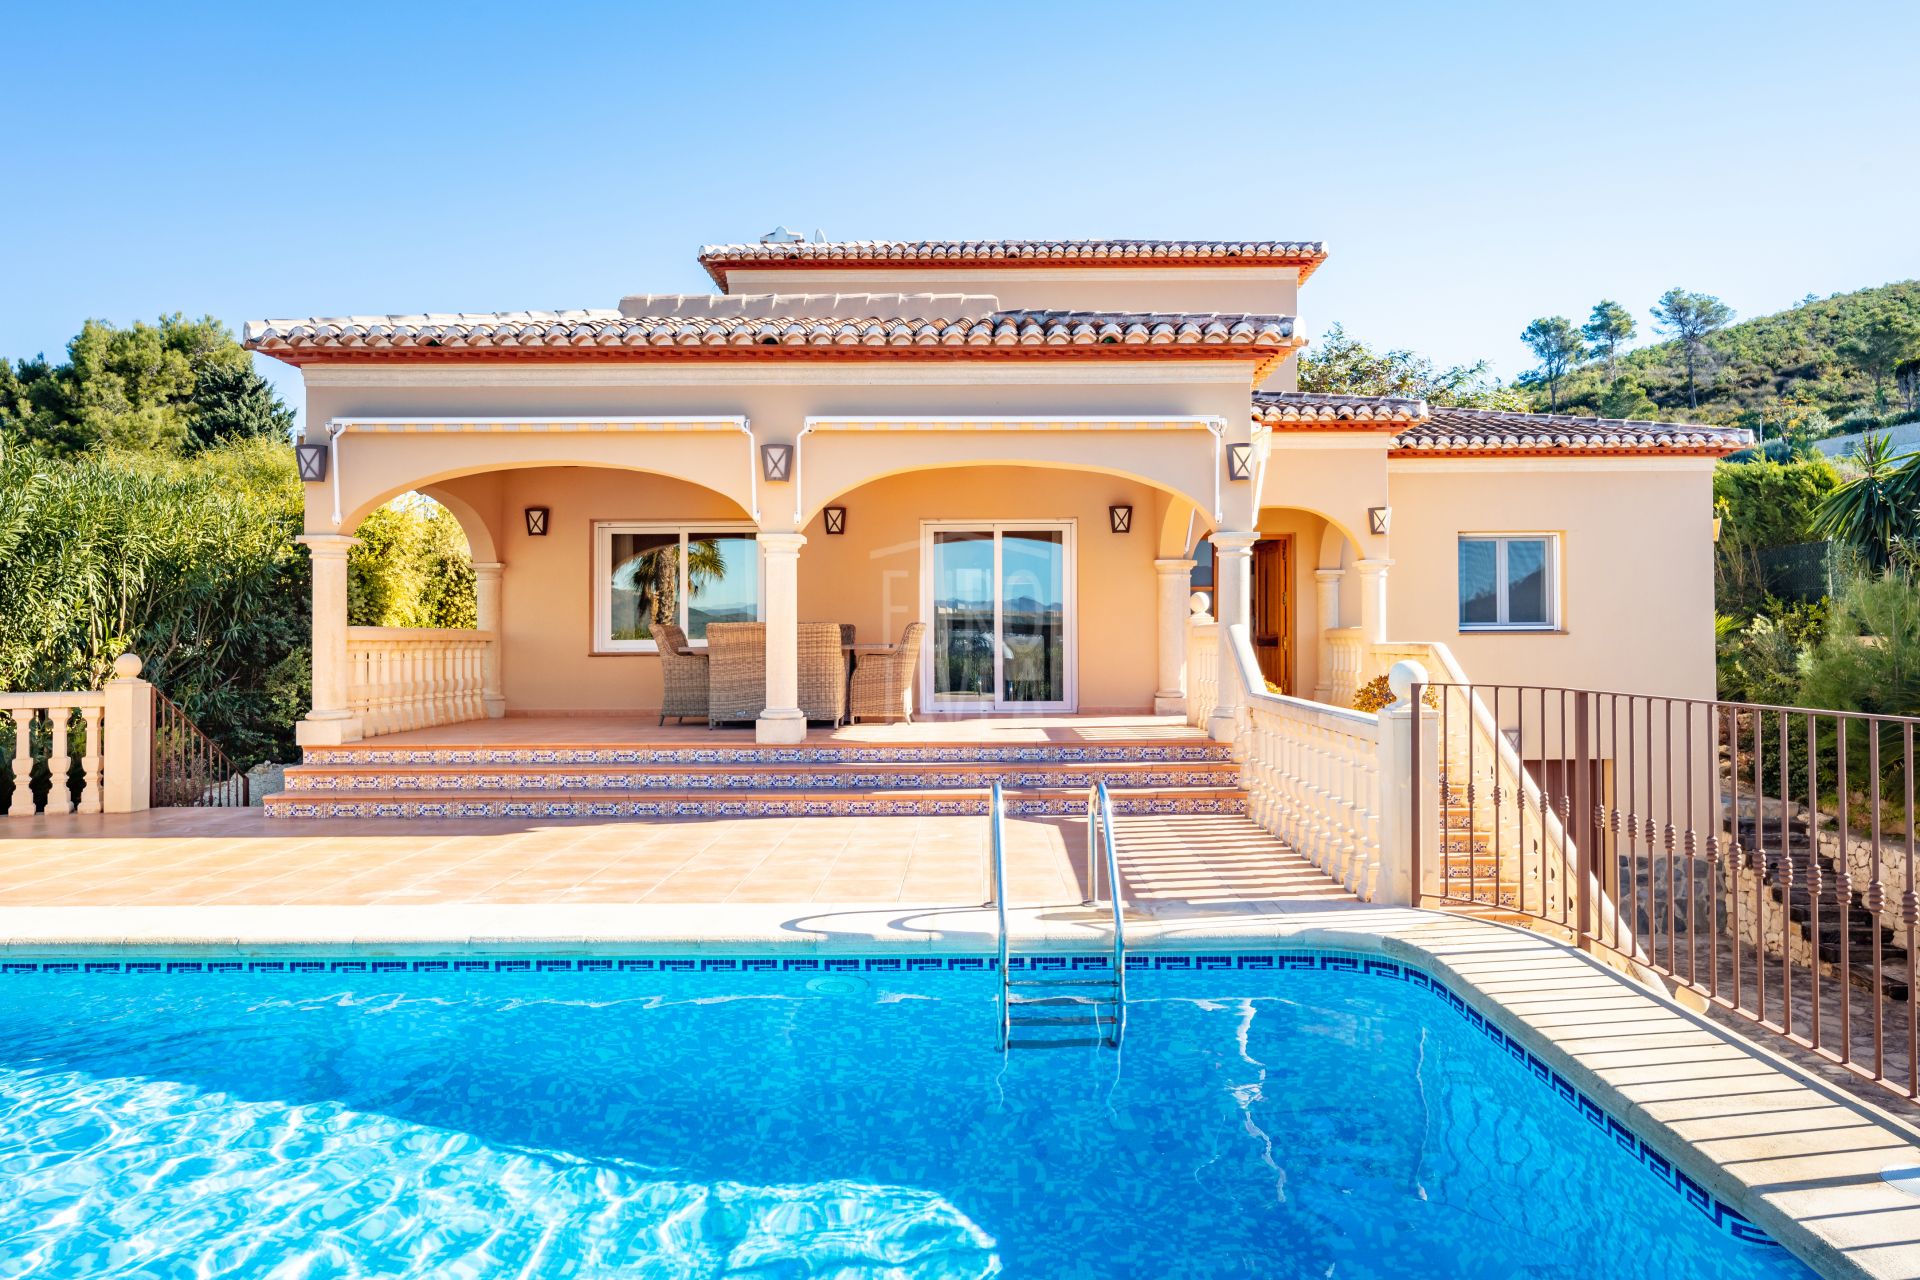 Villa for sale exclusively with Eurojavea in the Pinomar area, a few minutes from the beach